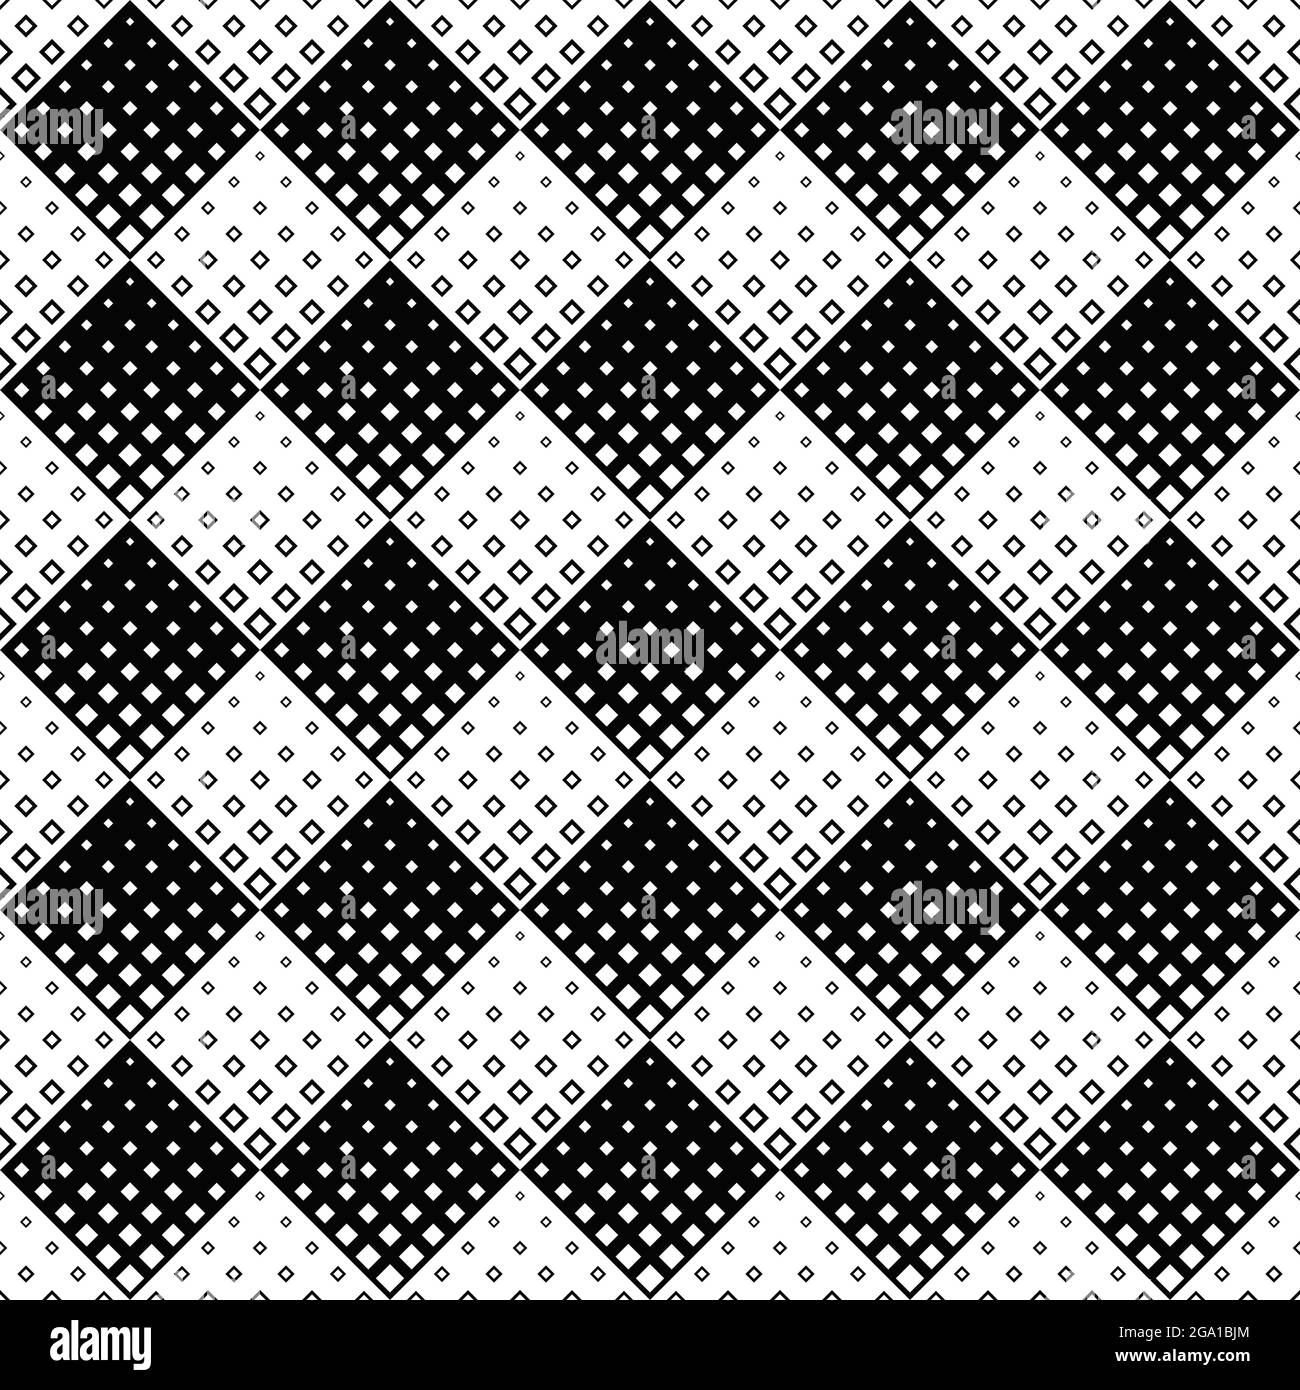 Geometrical seamless diagonal square pattern background - monochrome repeating vector illustration Stock Vector